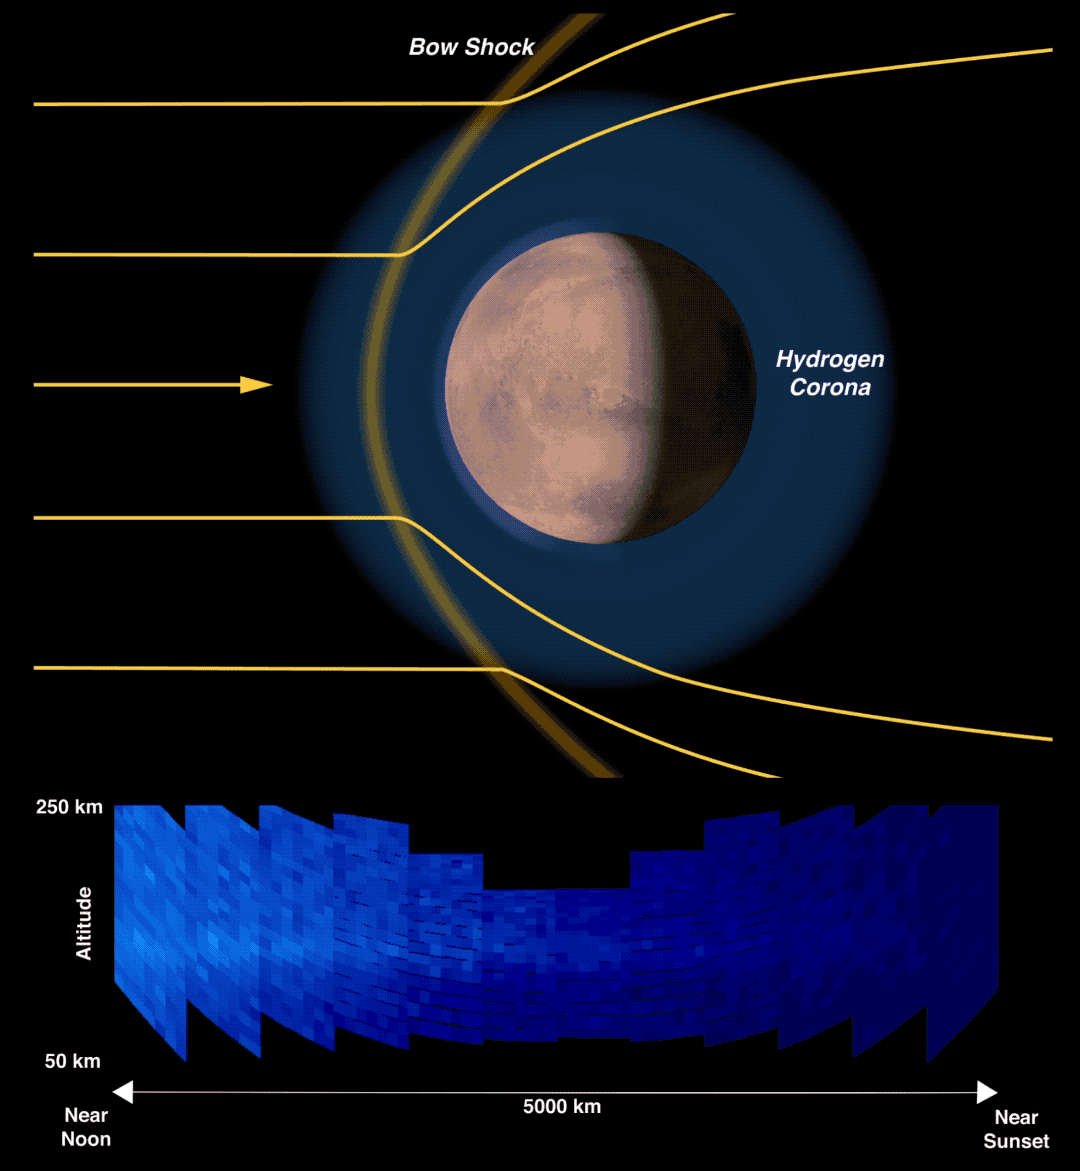 The Mars orbiter MAVEN observed a proton aurora around the Red Planet. This diagram shows how changes in the solar wind impact the visible emissions.